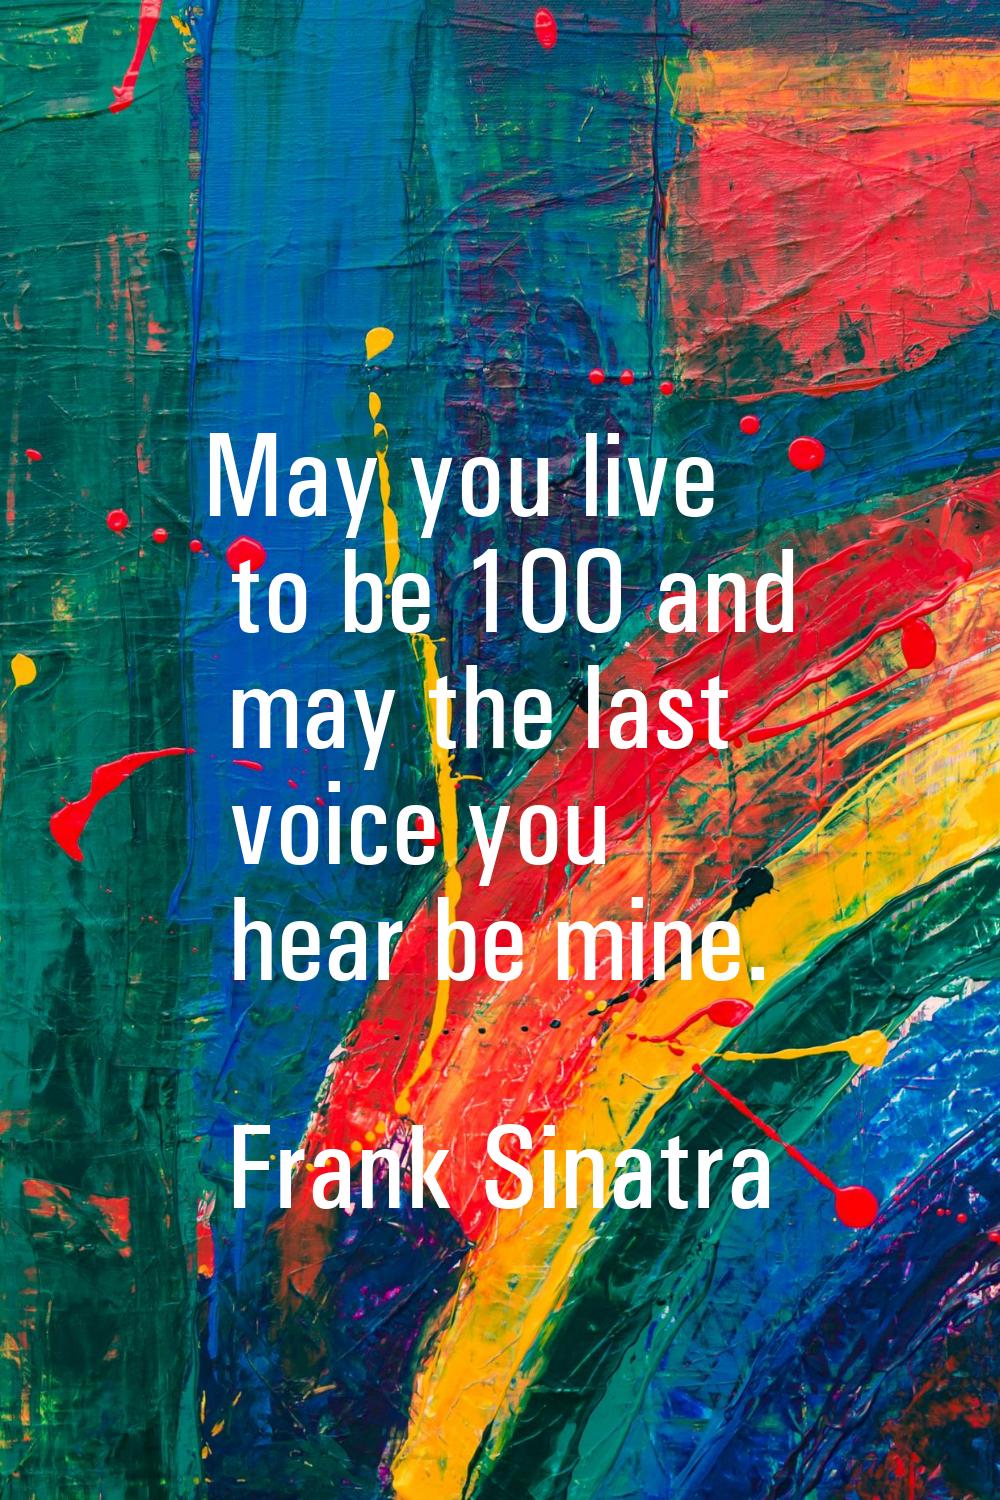 May you live to be 100 and may the last voice you hear be mine.